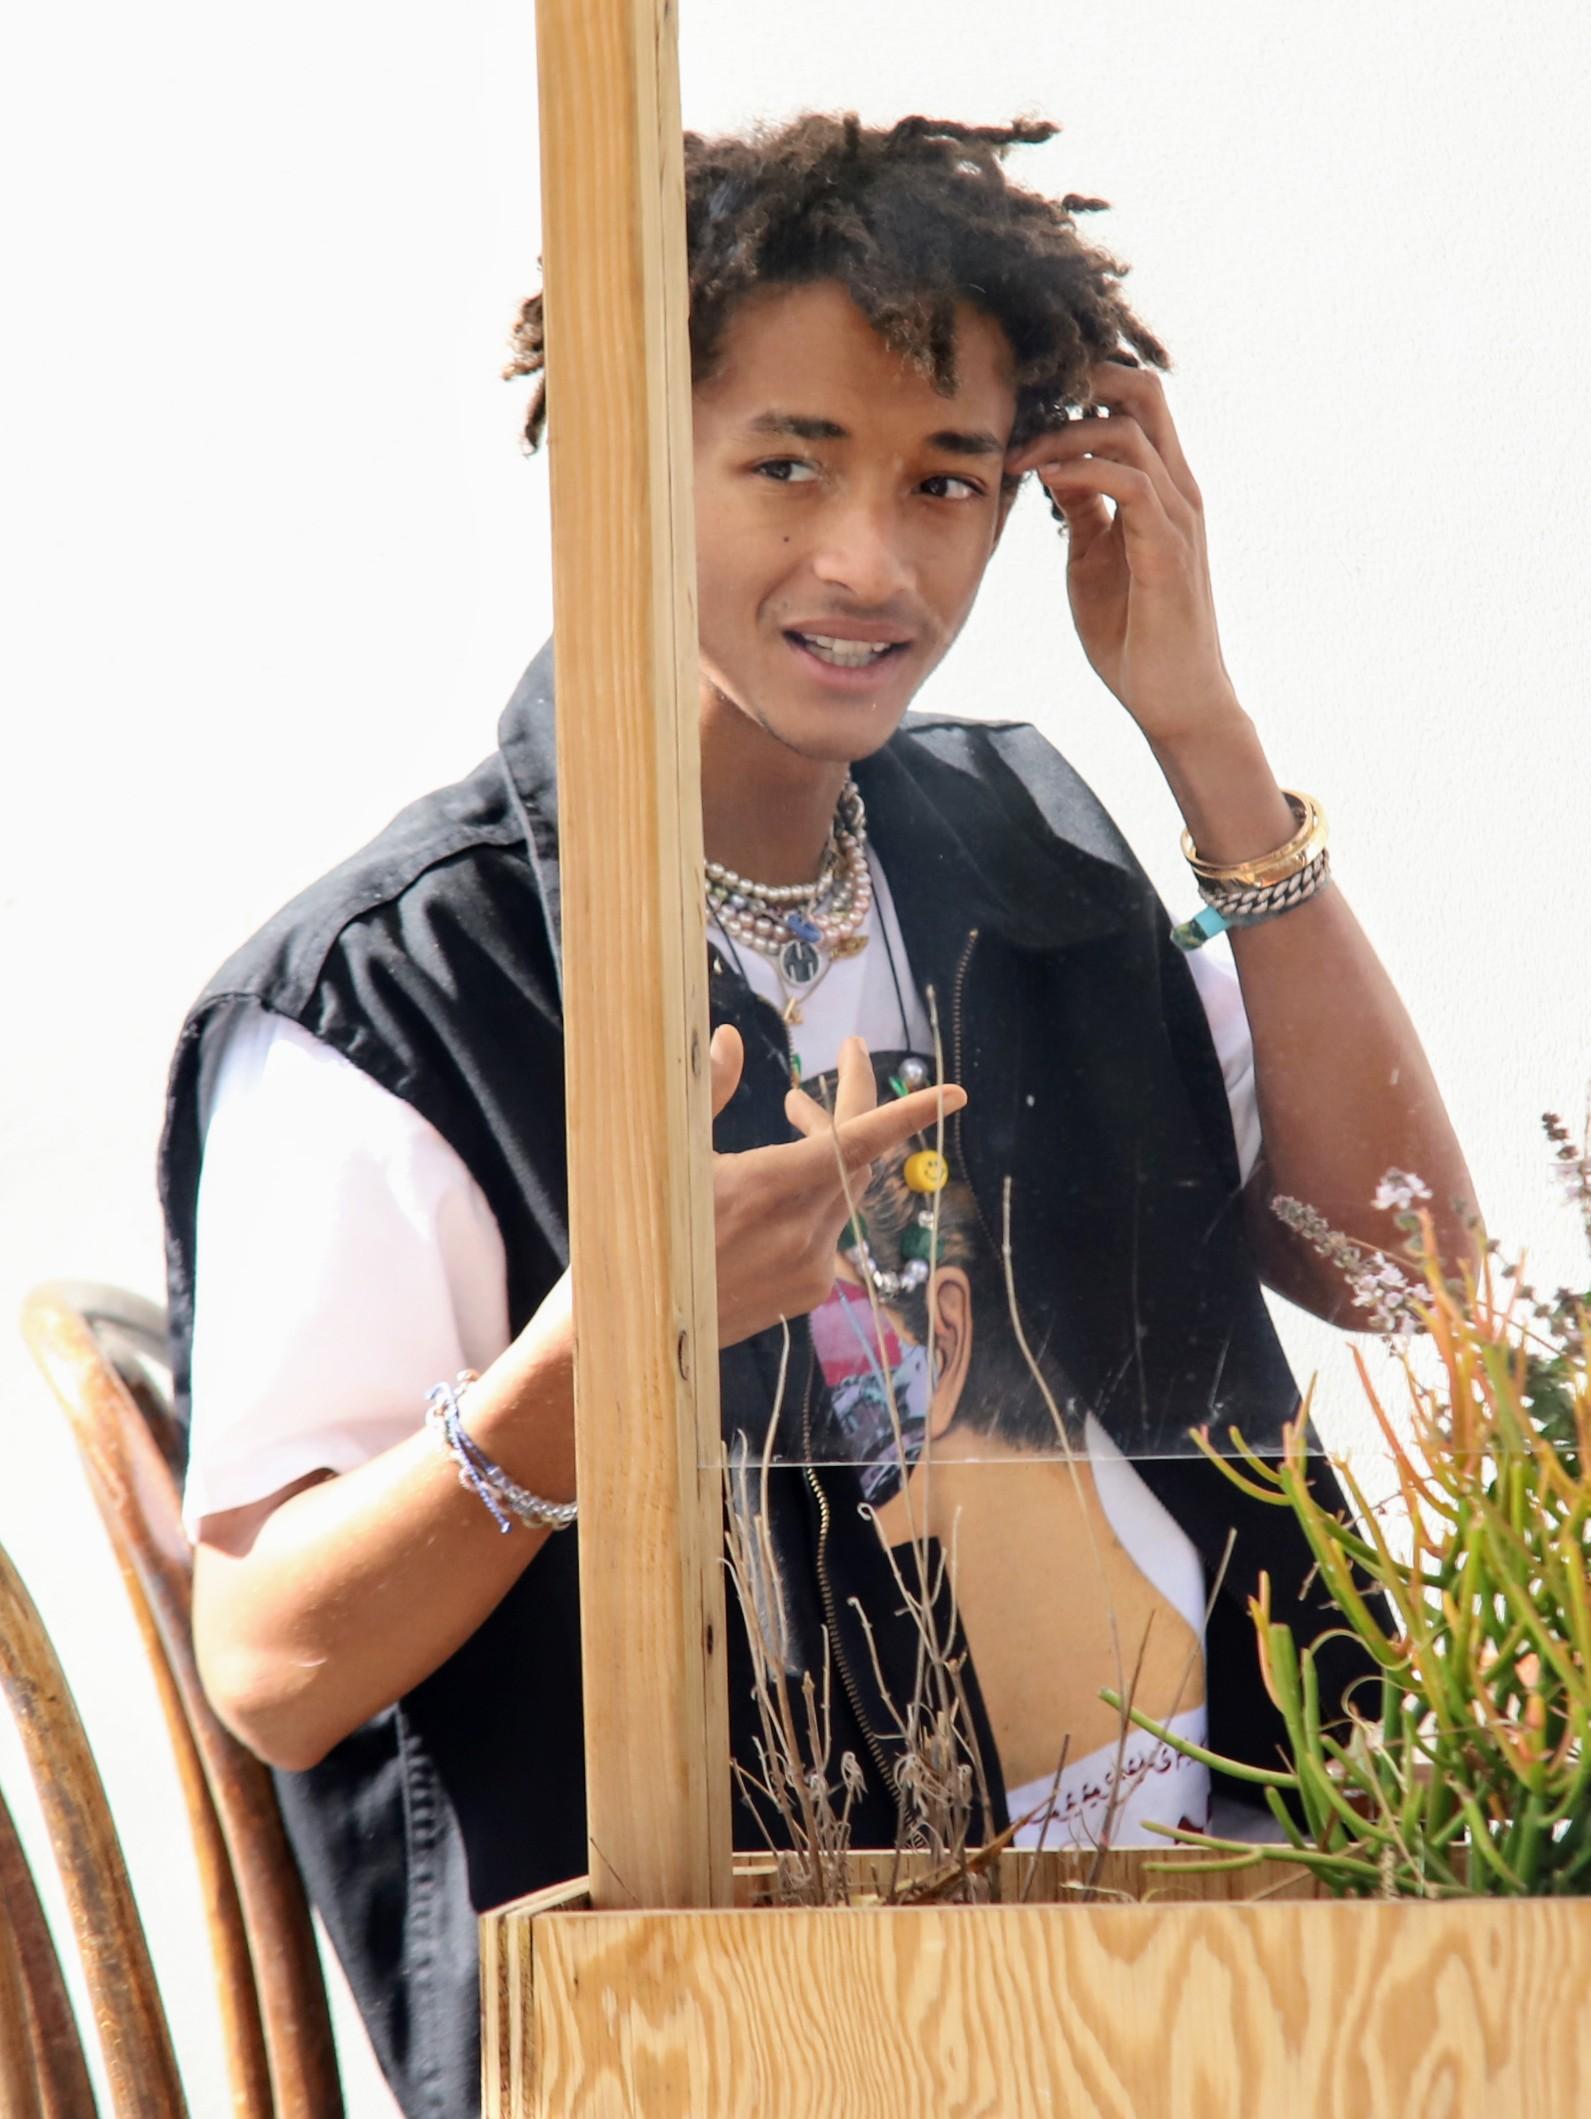 Jaden Smith seen lunching with friend while promoting his new music "Transitions" on his back